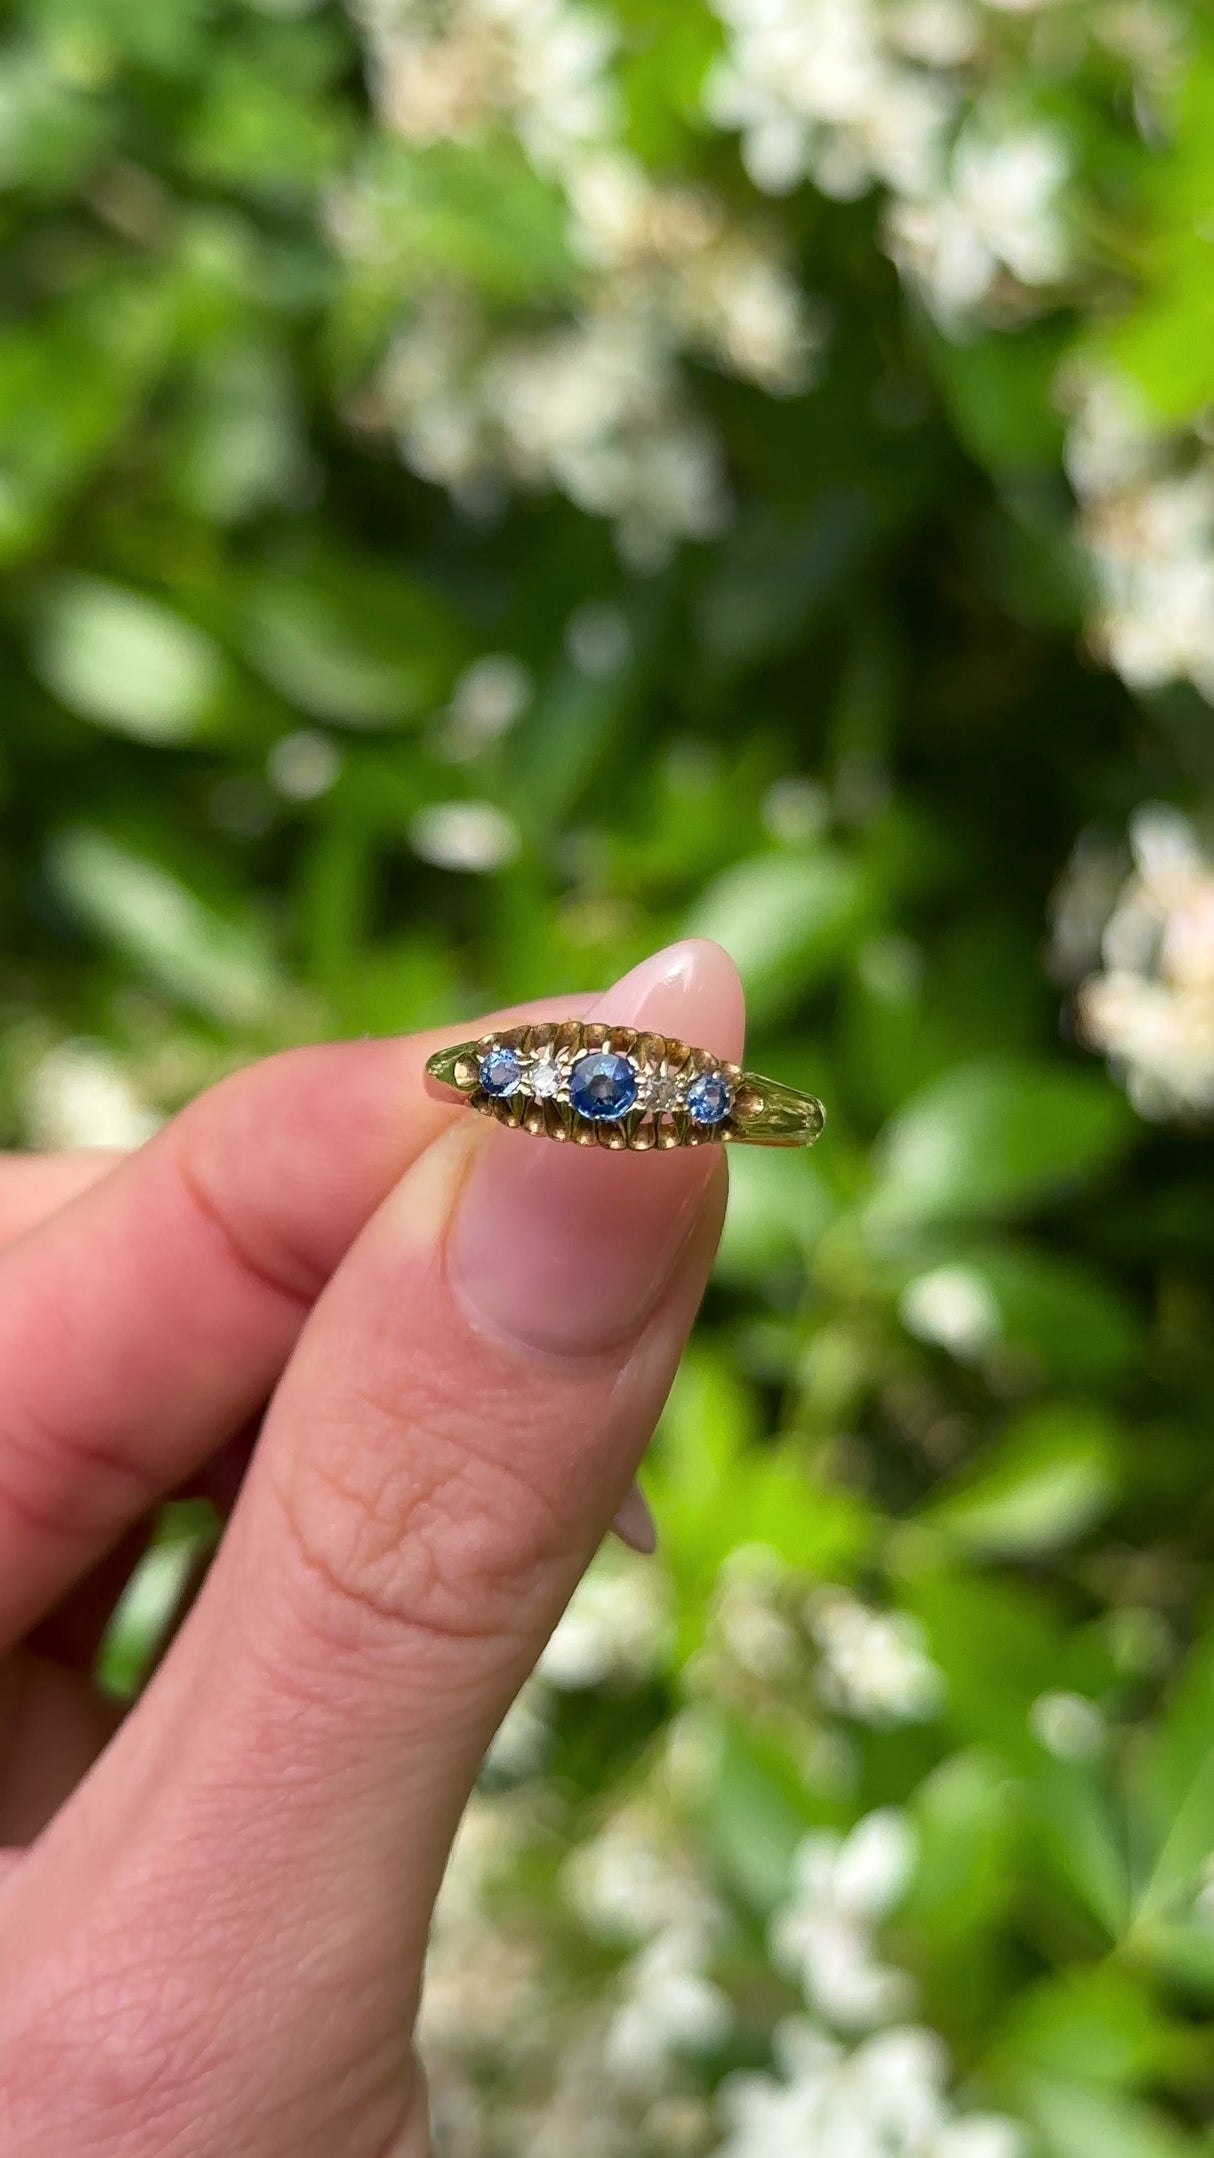 Antique, Edwardian Sapphire and Diamond Five-Stone Ring, 18ct Yellow Gold held in fingers